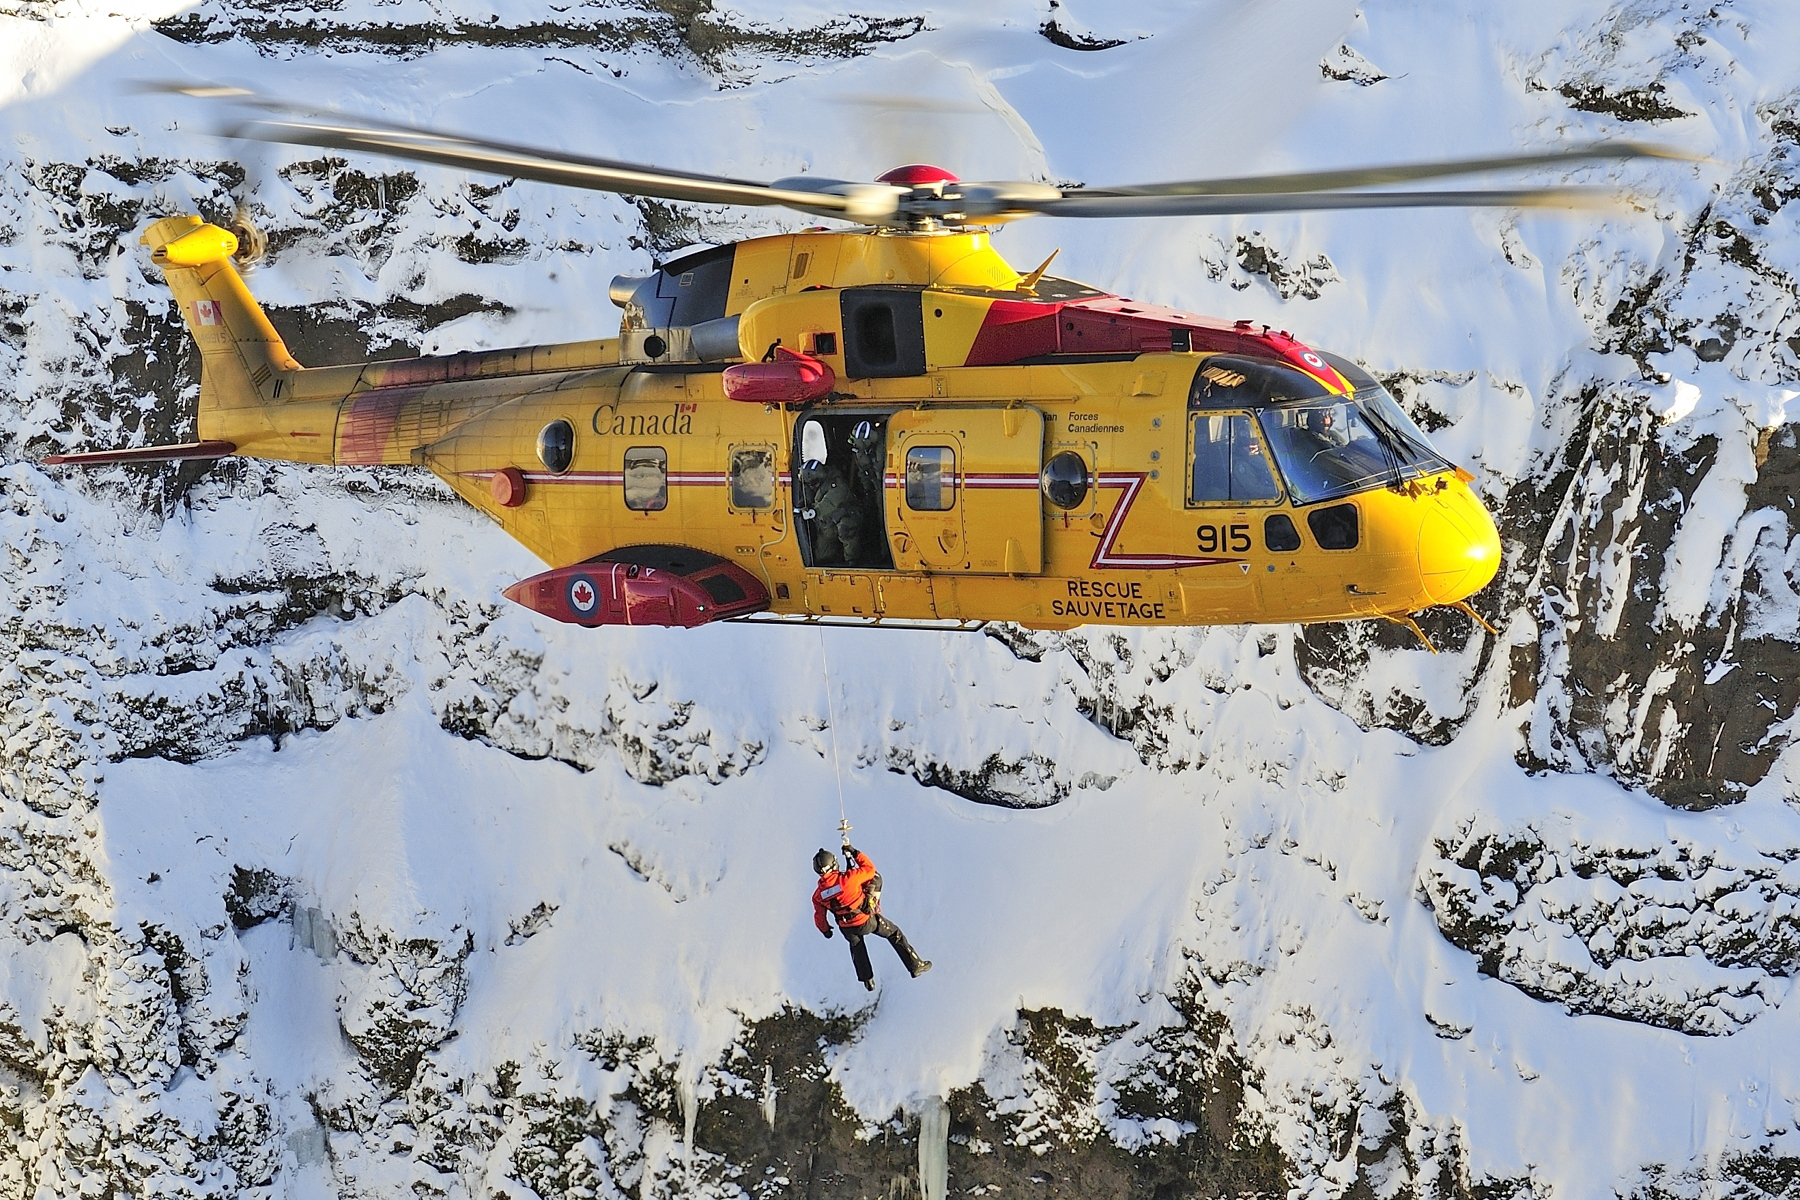 A person hangs suspended on a tether from a large helicopter flying near snow-covered, mountainous terrain.